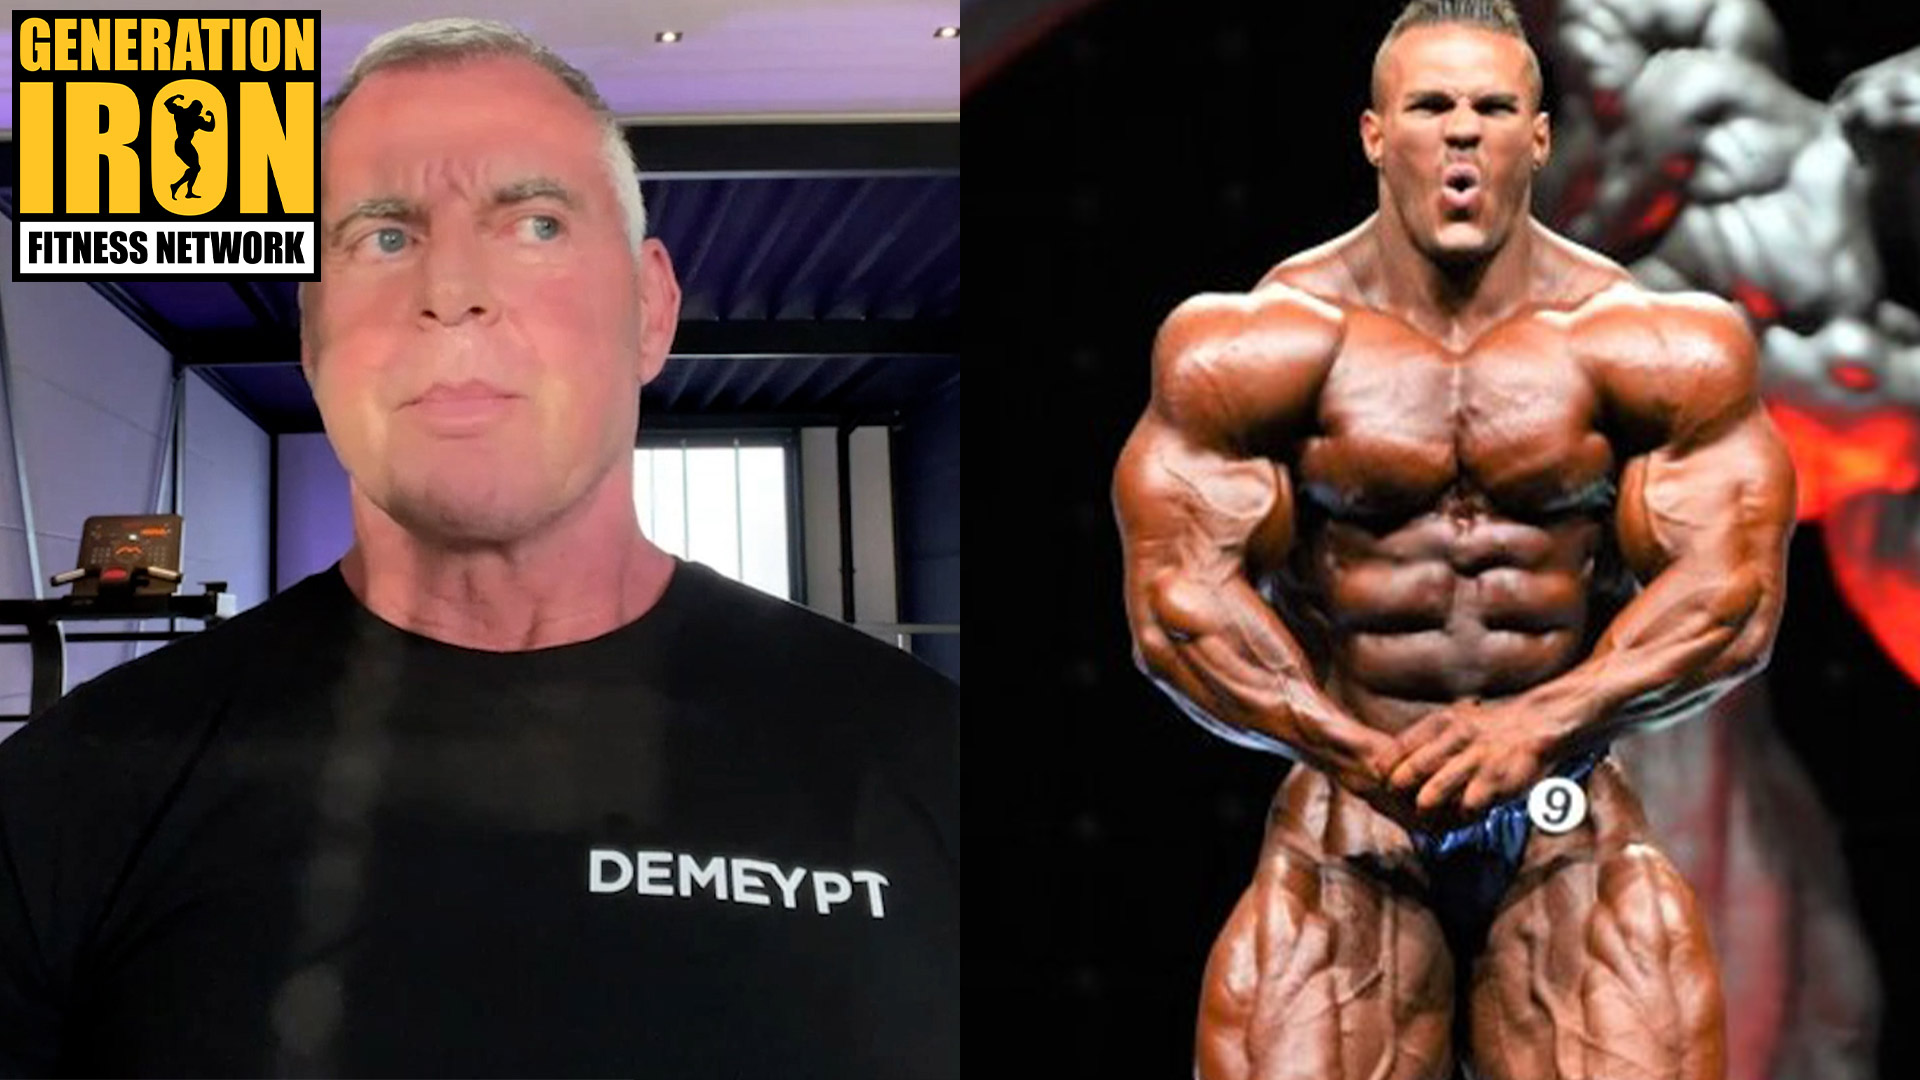 Berry De Mey Clarifies His Critical Comments: “Bodybuilding In Total Is Becoming Insane”